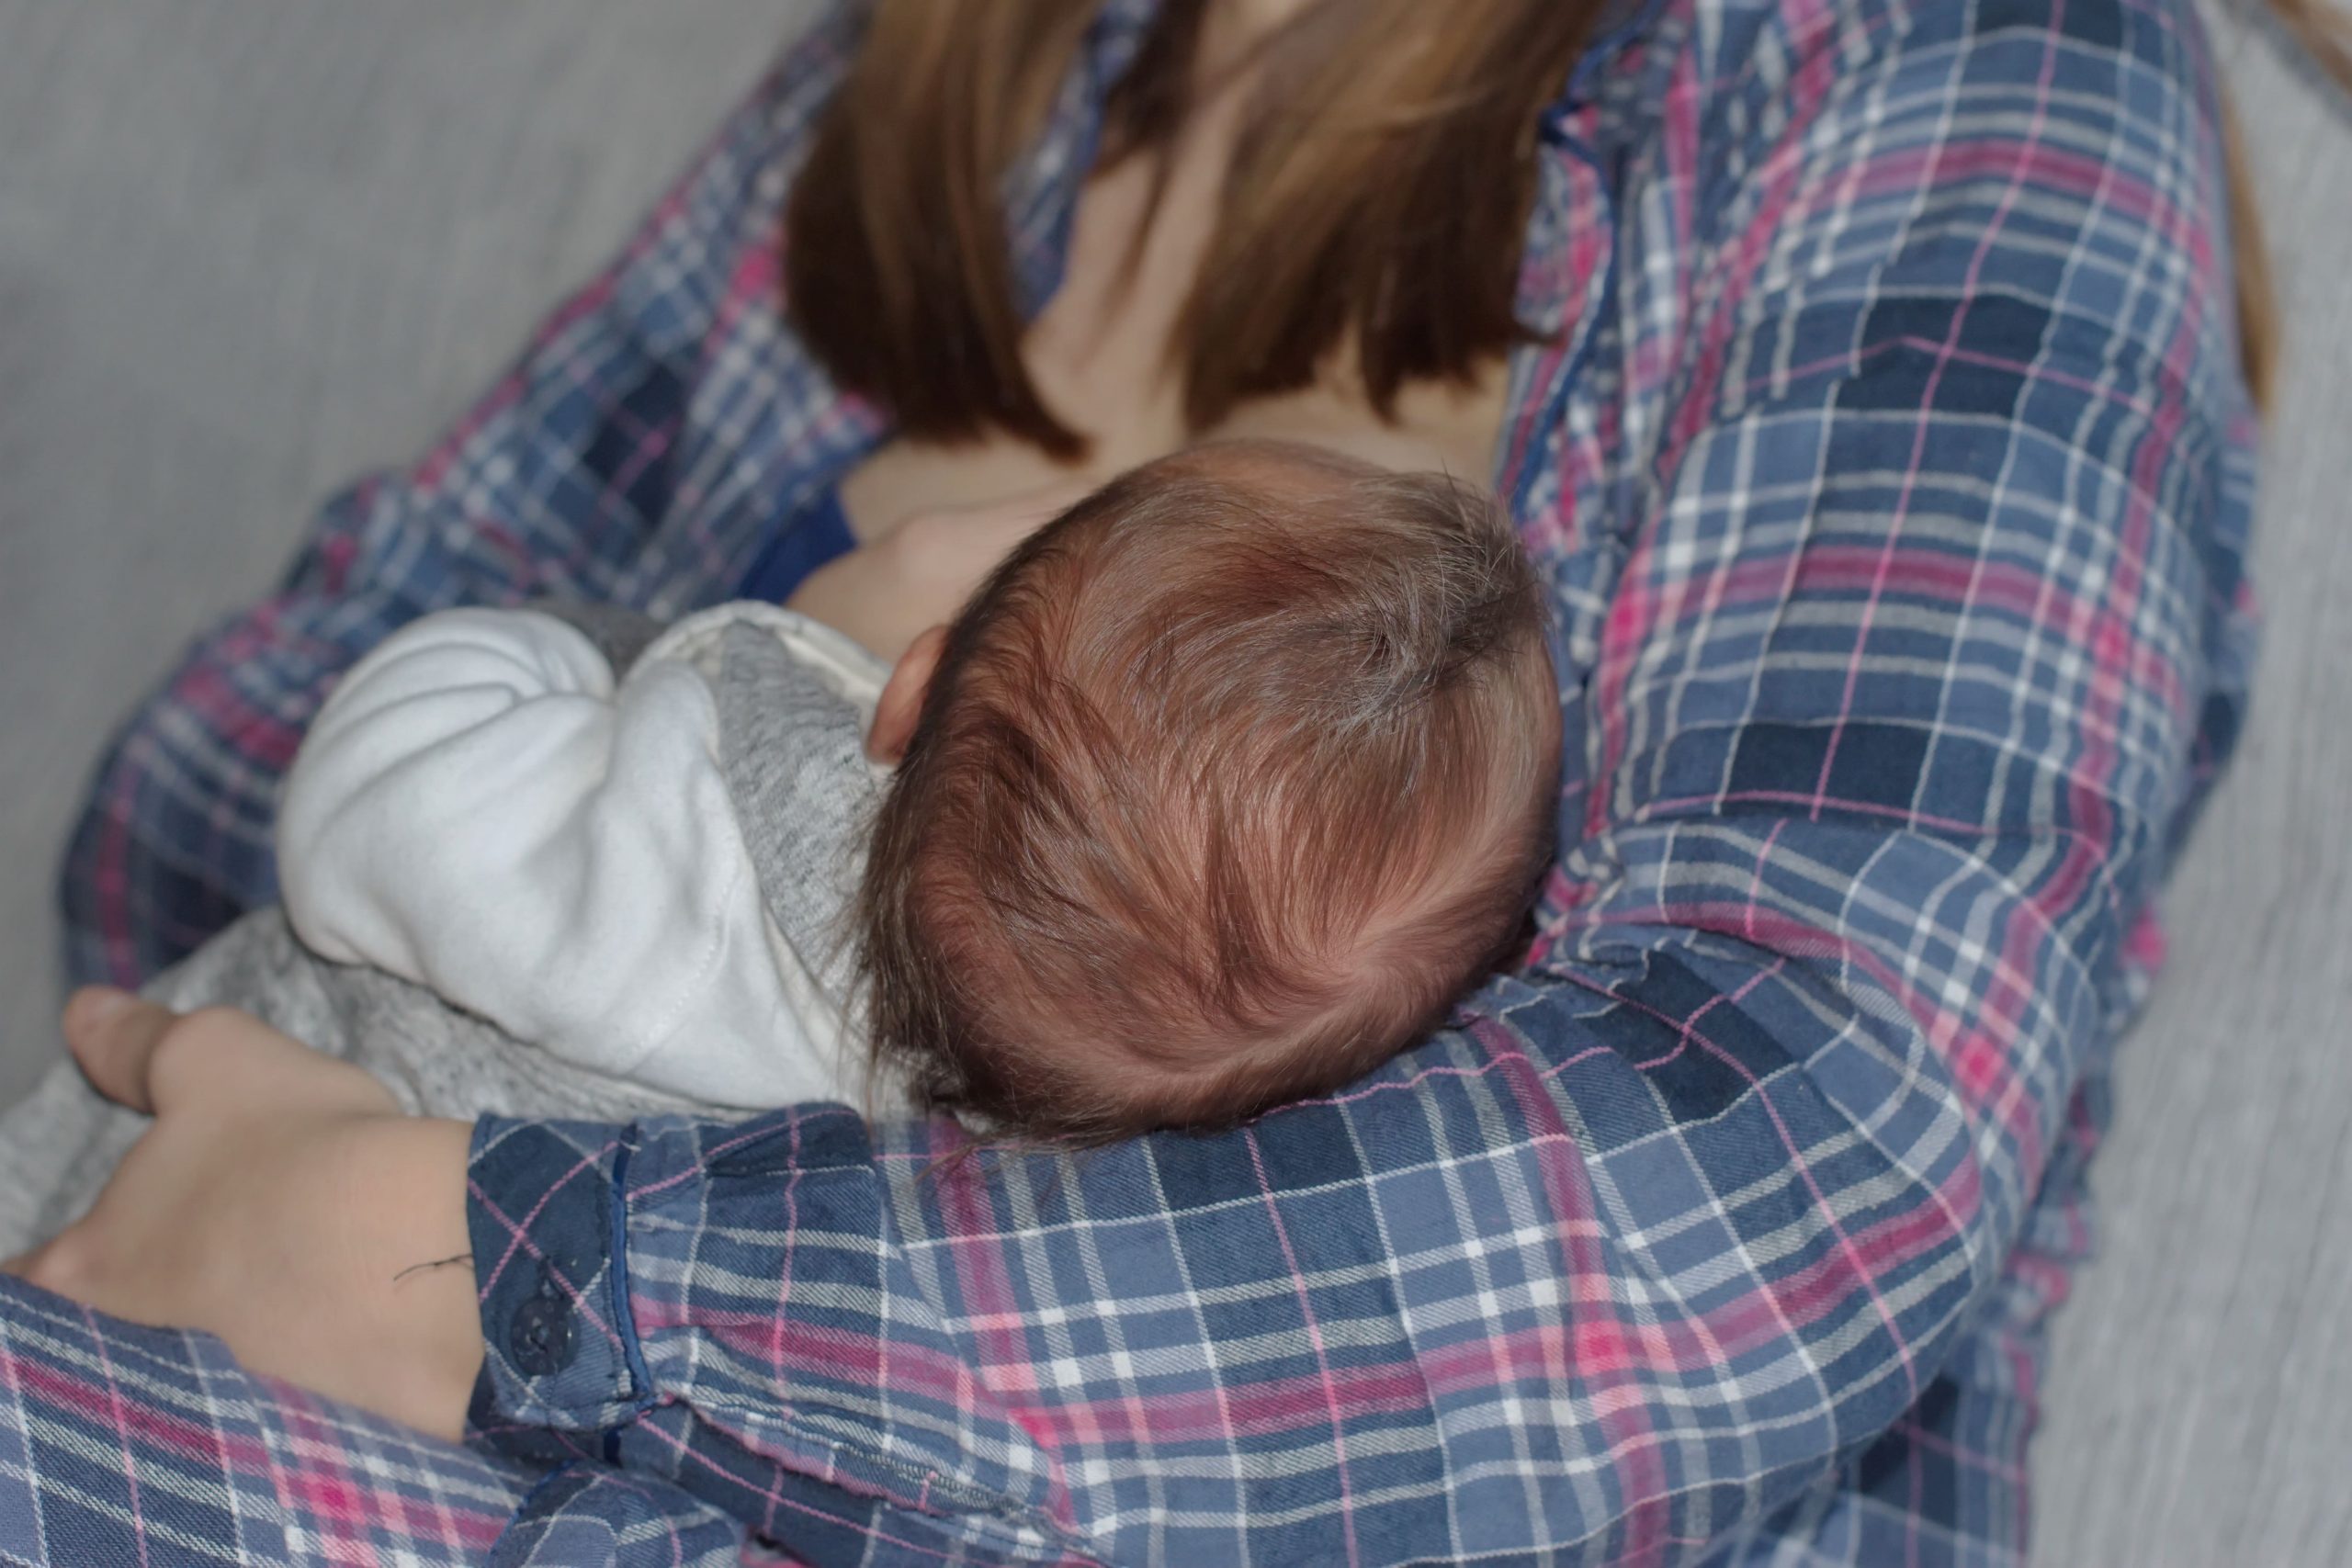 Breastfeeding leave - Even if your spouse does not work